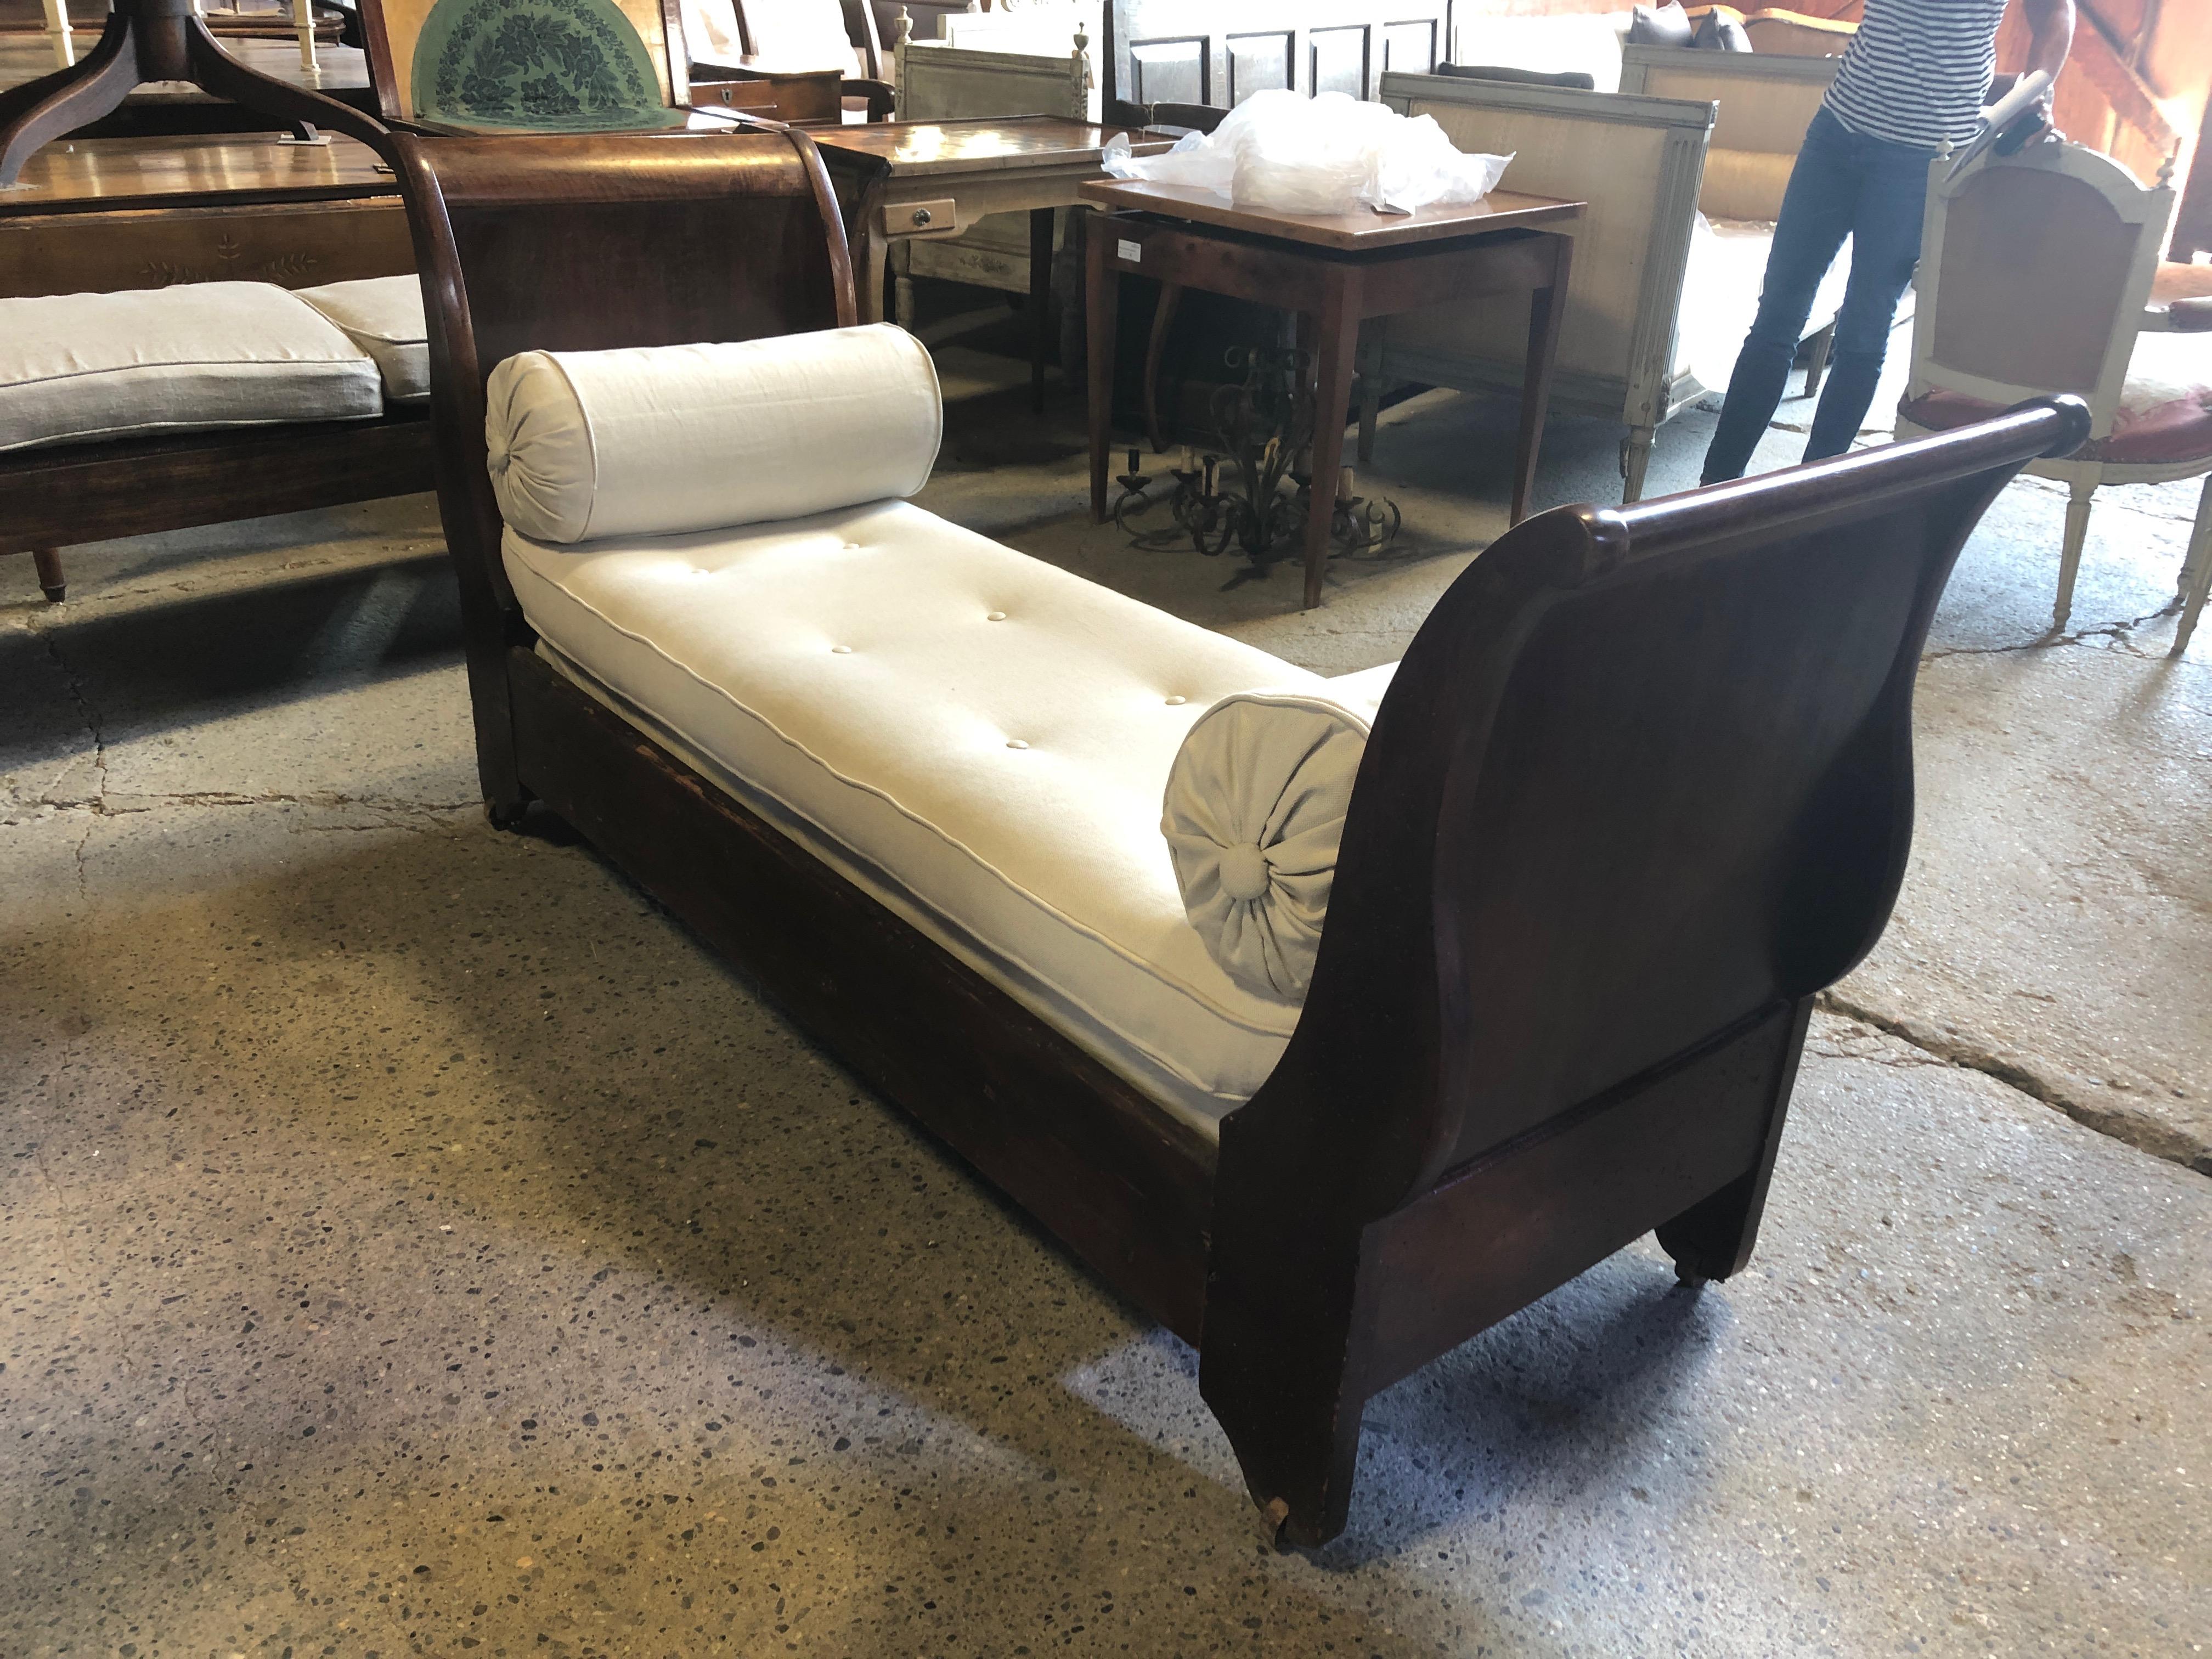 A show stopper elegant French Empire 19th century mahogany daybed, long curvy and sleek, having neoclassical bronze embellishments and crisp new British cotton linen blend upholstery with generous lumbar pillows. The original wooden casters add to